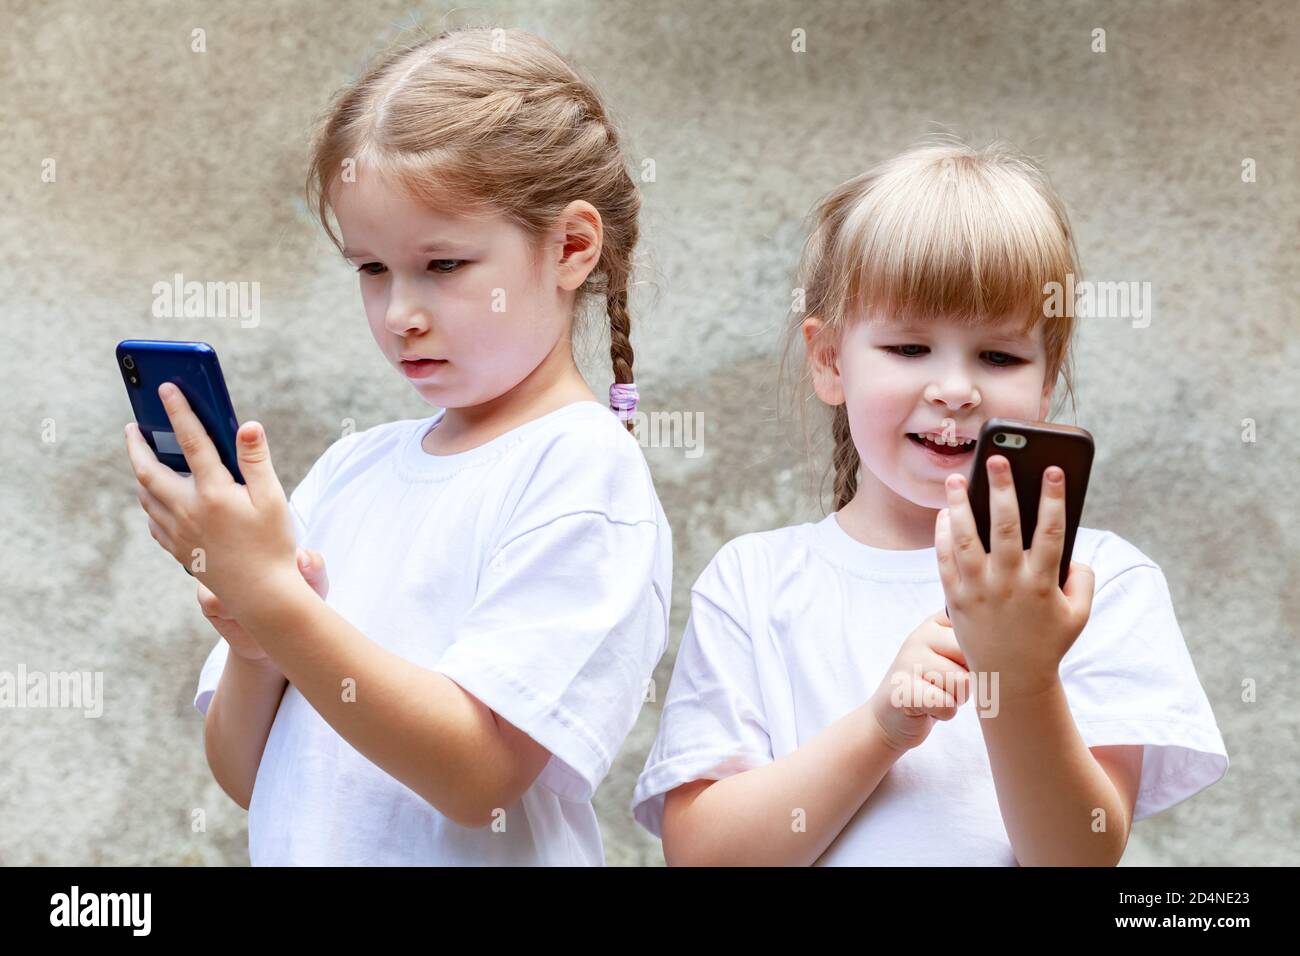 Sisters, young children using modern smartphones, two girls together holding and using their mobile phones, playing around. Tech savvy generation Stock Photo